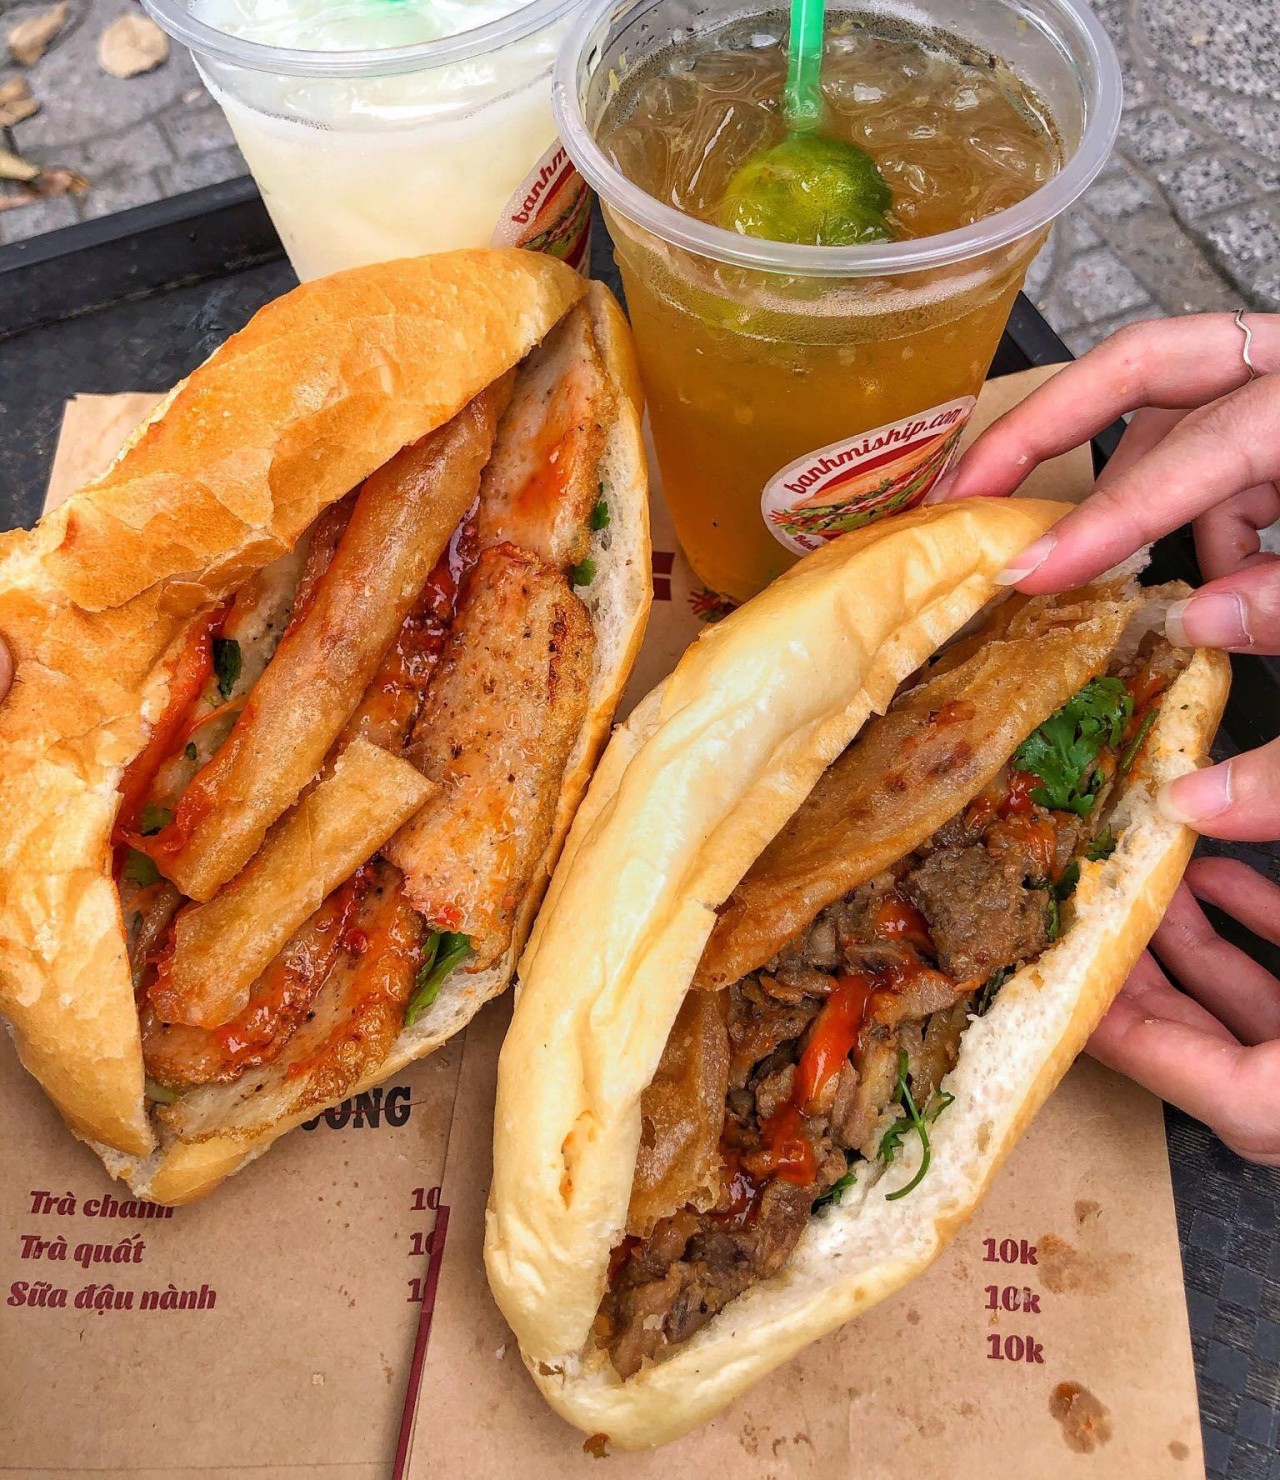 Bánh mì (pronounced 'bun mee') is a popular Vietnamese variety of sandwiches that share the same core ingredient  a baguette.